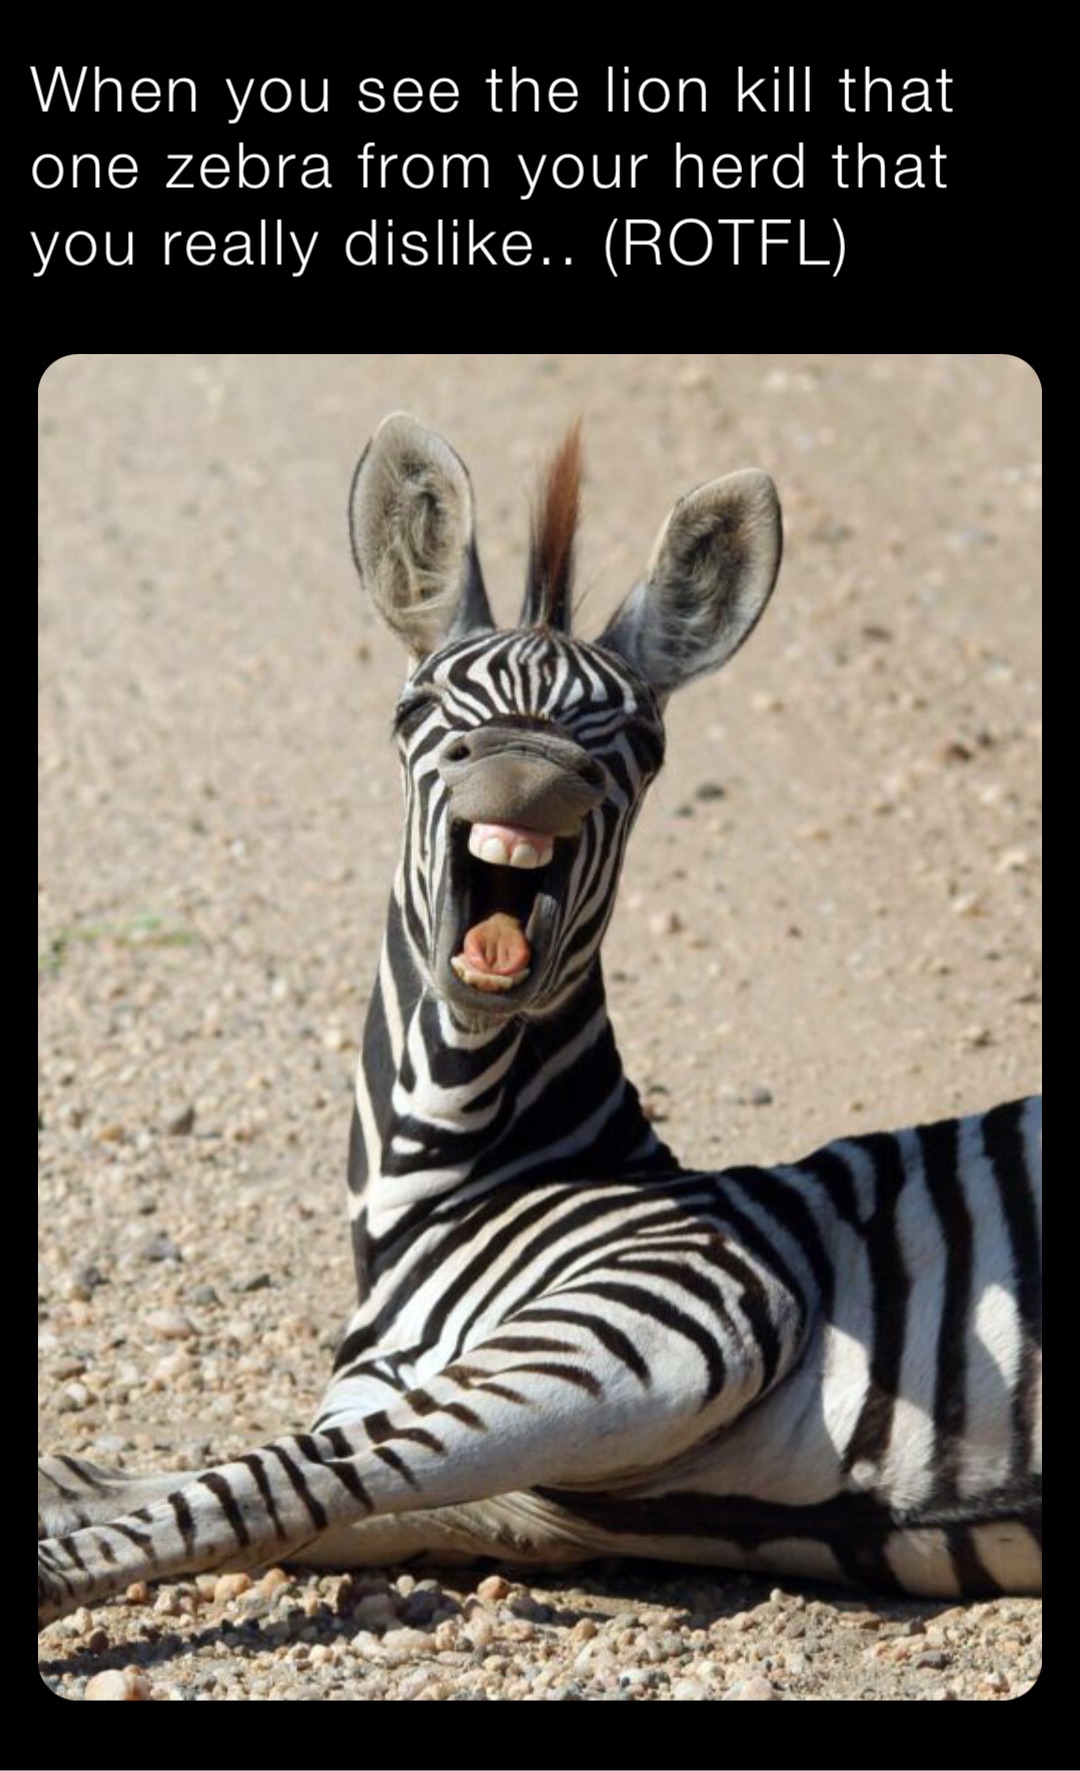 When you see the lion kill that one zebra from your herd that you really dislike.. (ROTFL)